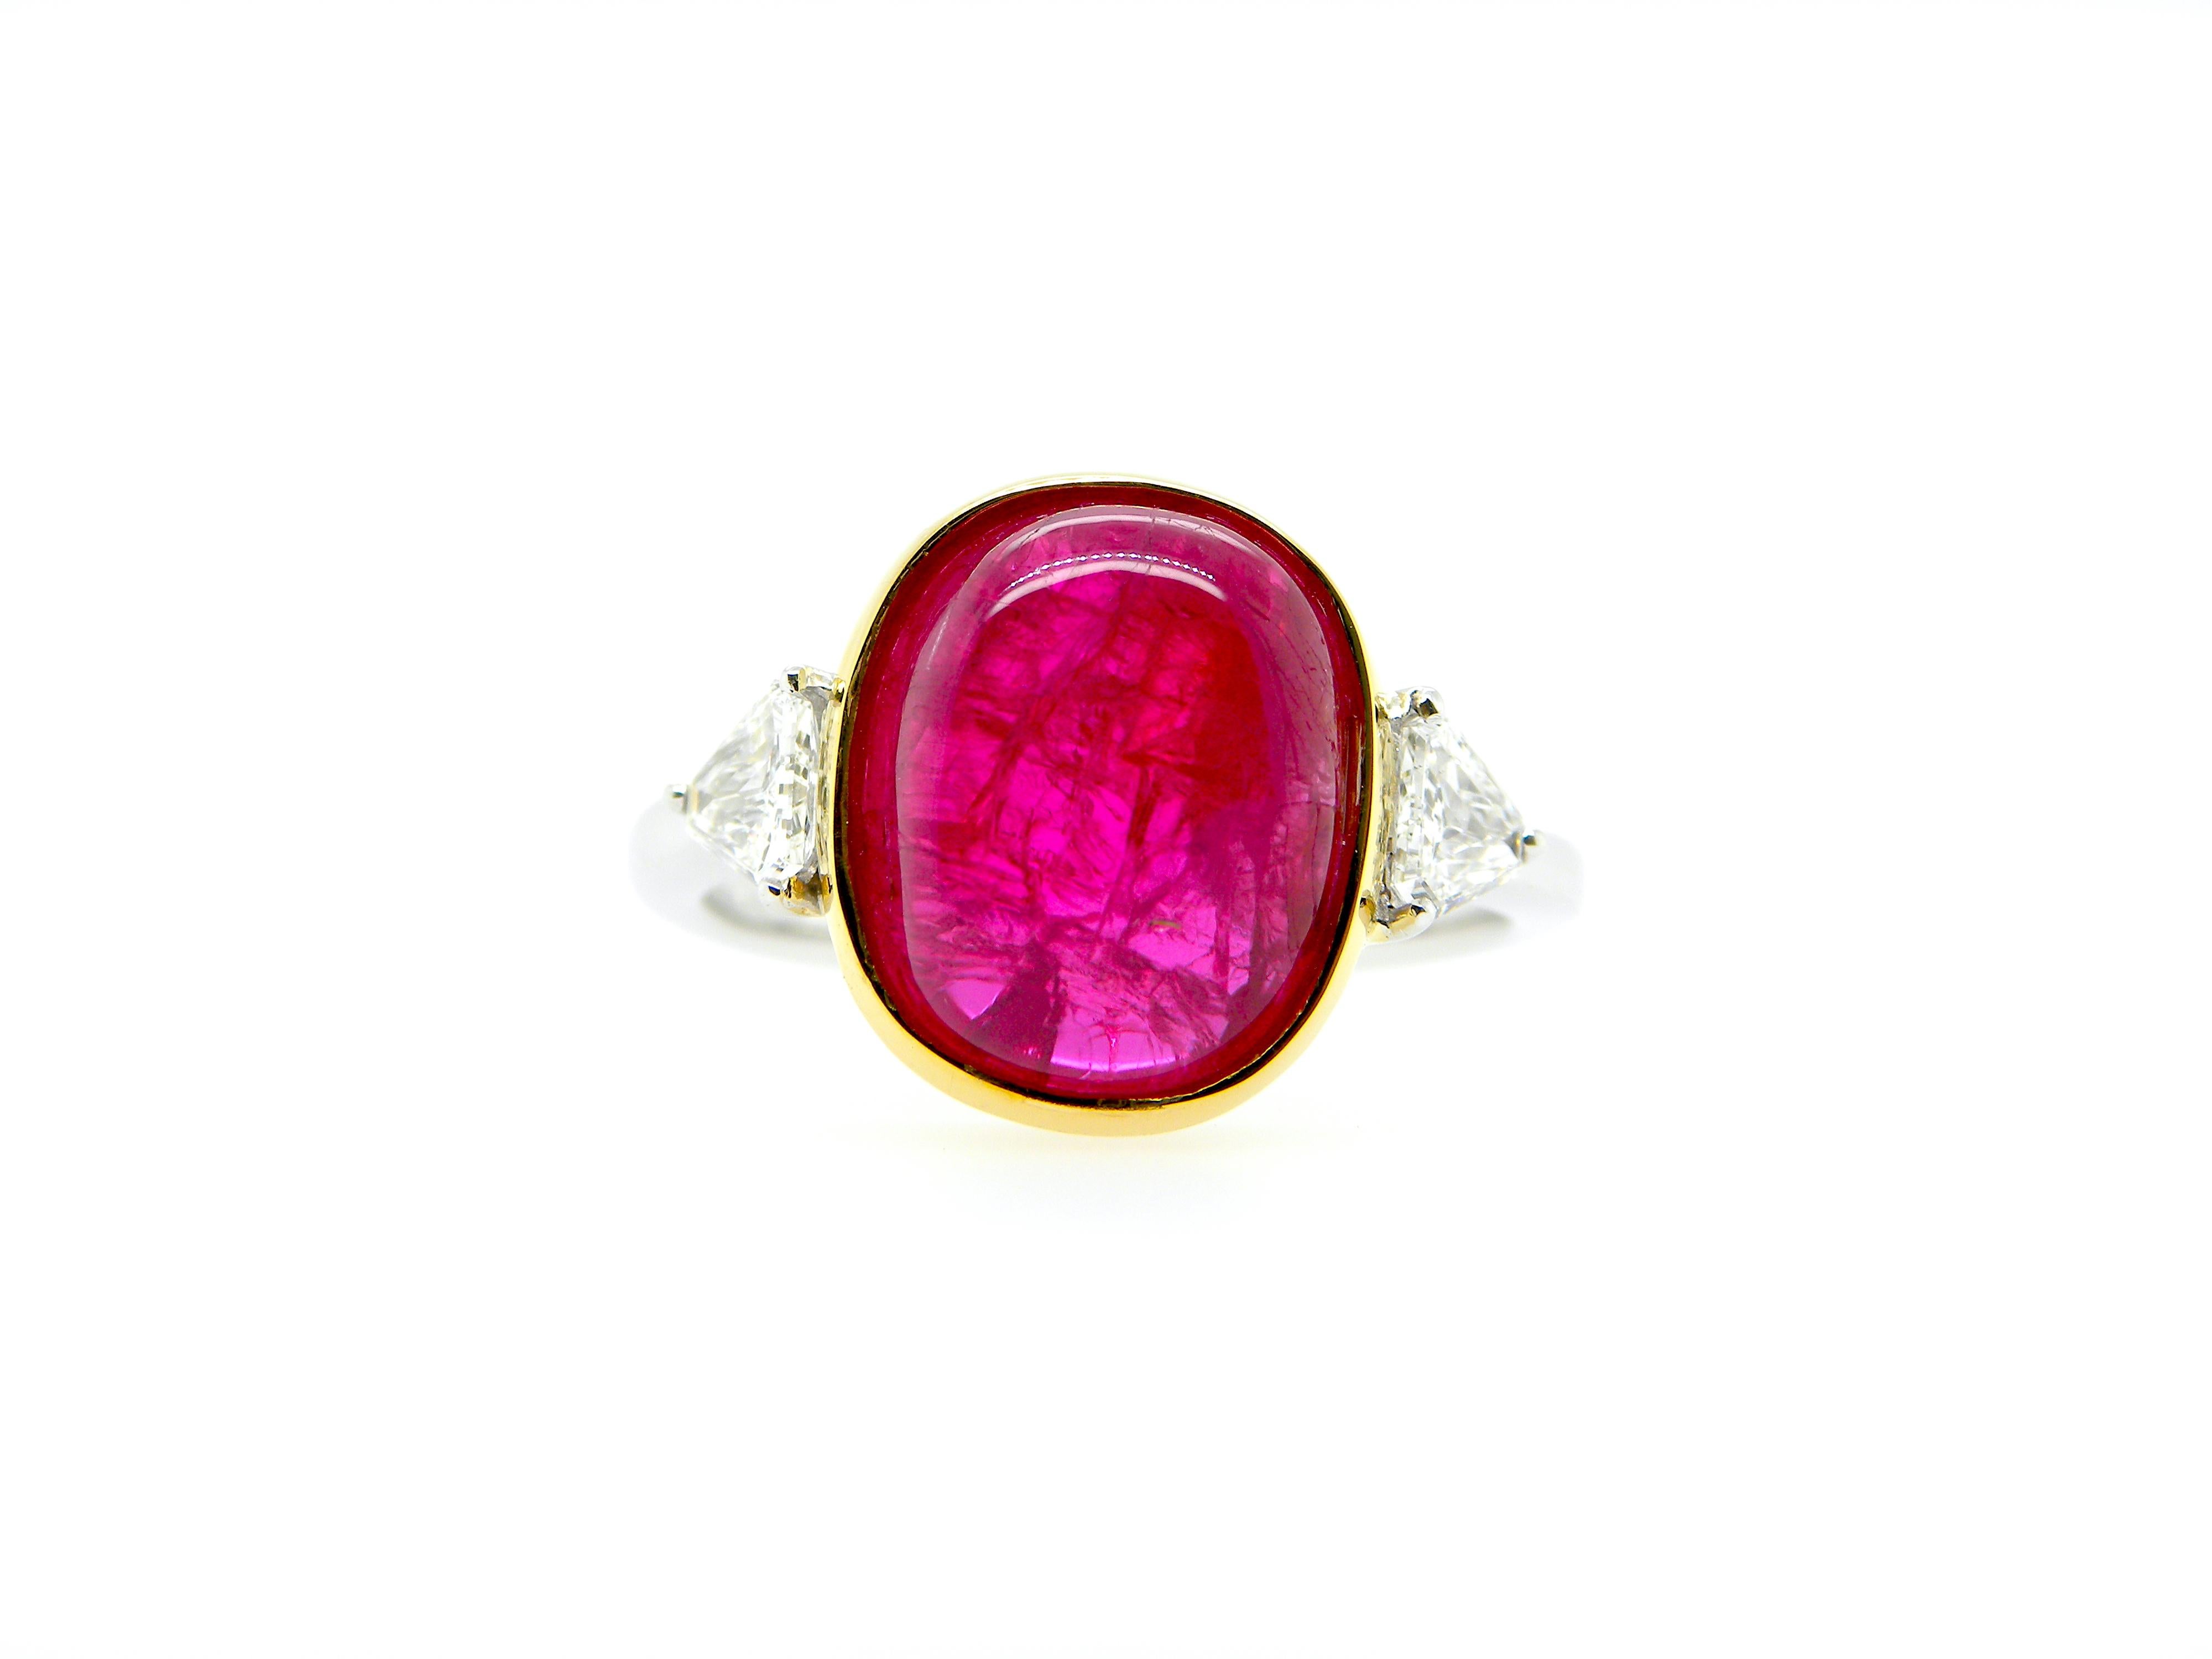 6.54 Carat GIA Certified Burma No Heat Ruby Cabochon and White Diamond Ring:

A superb and rare ring, it features a gorgeous GIA certified 6.54 carat unheated Burmese ruby cabochon flanked by white shield-cut diamonds weighing 0.42 carat. The ruby,